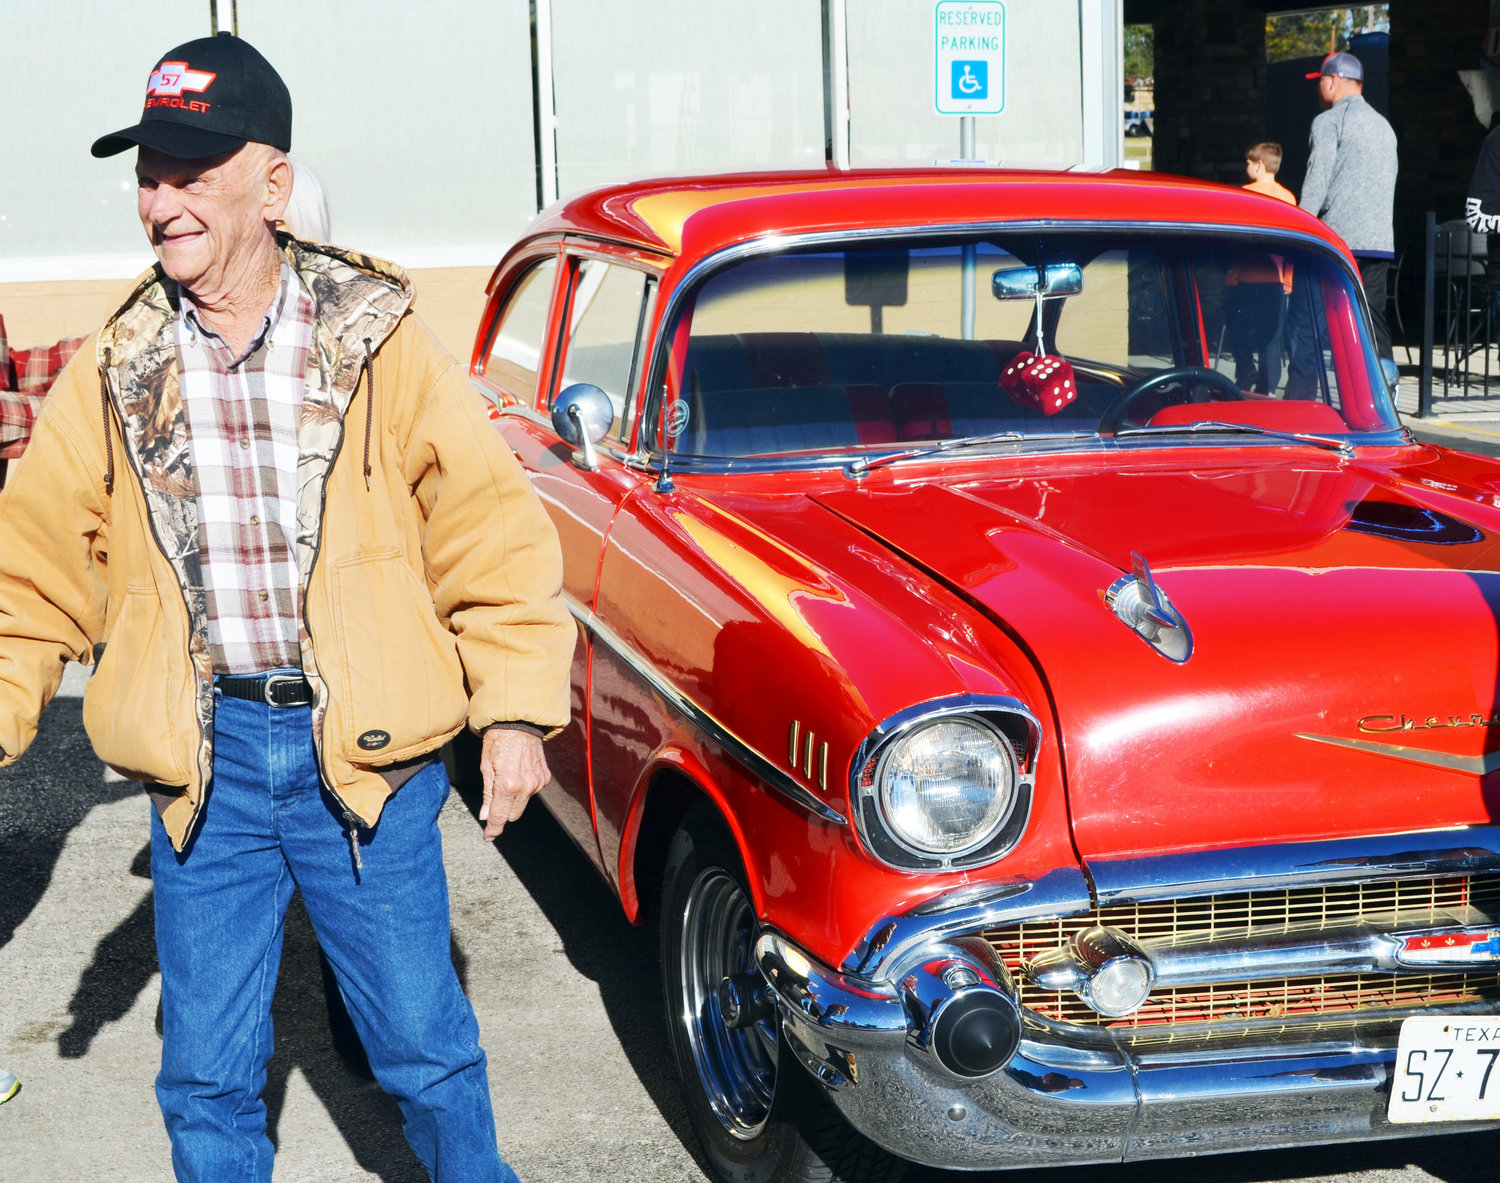 Travis Lloyd is all smiles after climbing out of Wayne Caldwell’s 1957 Chevy in the parking lot of the Dairy Queen in Quitman on Dec. 21. The ’57 Chevy has always been Lloyd’s dream car.